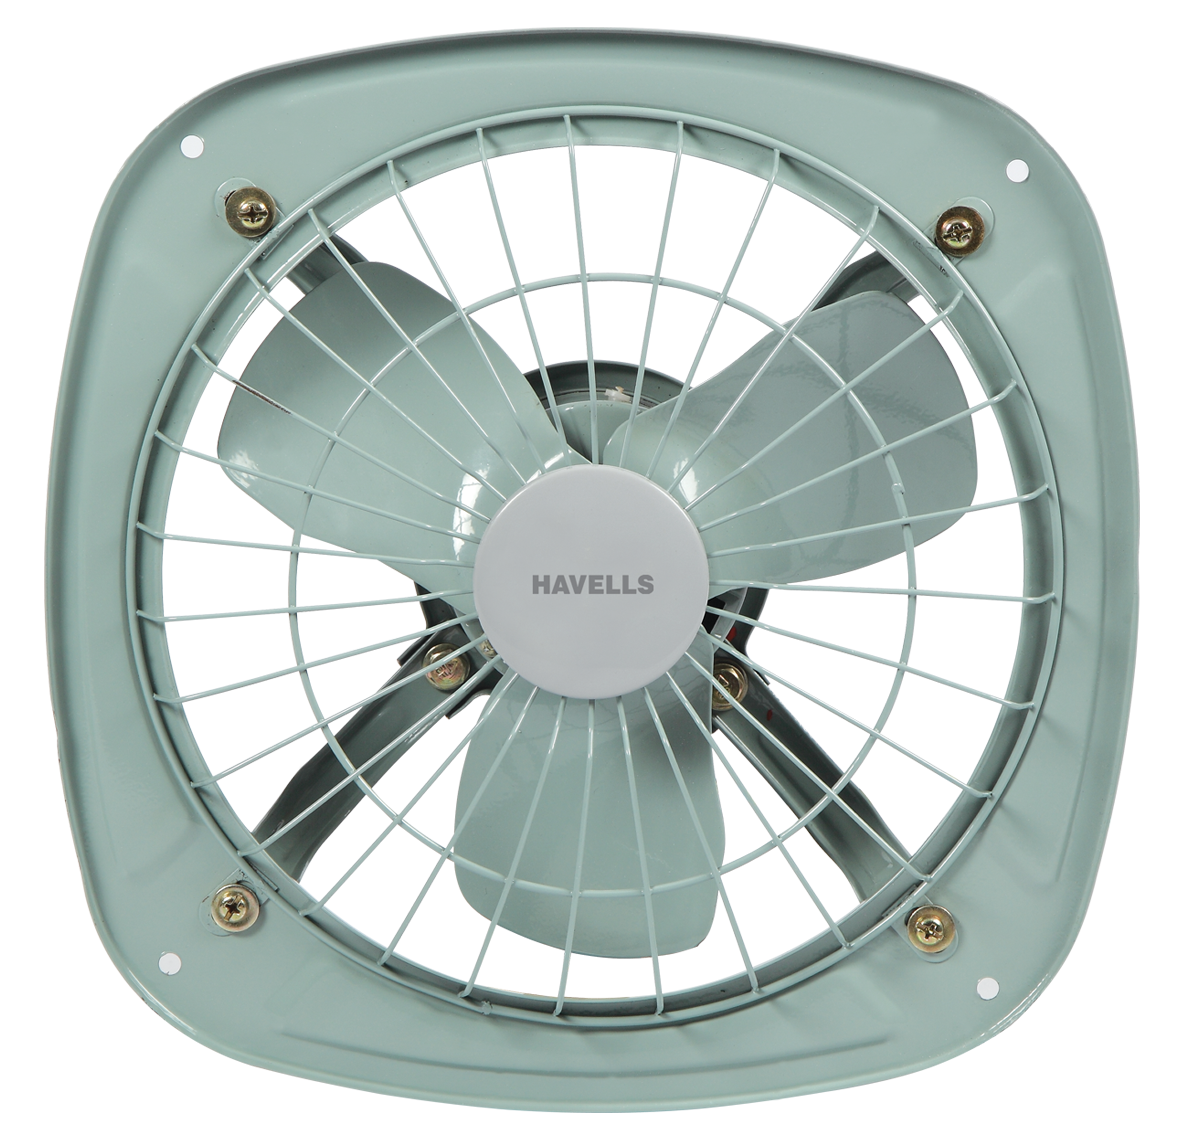 Havells 1350rpm Ventil Air Dsp Pista Green Exhaust Fan Sweep 230 Mm At 1439 - How To Check Bathroom Fan Ventil